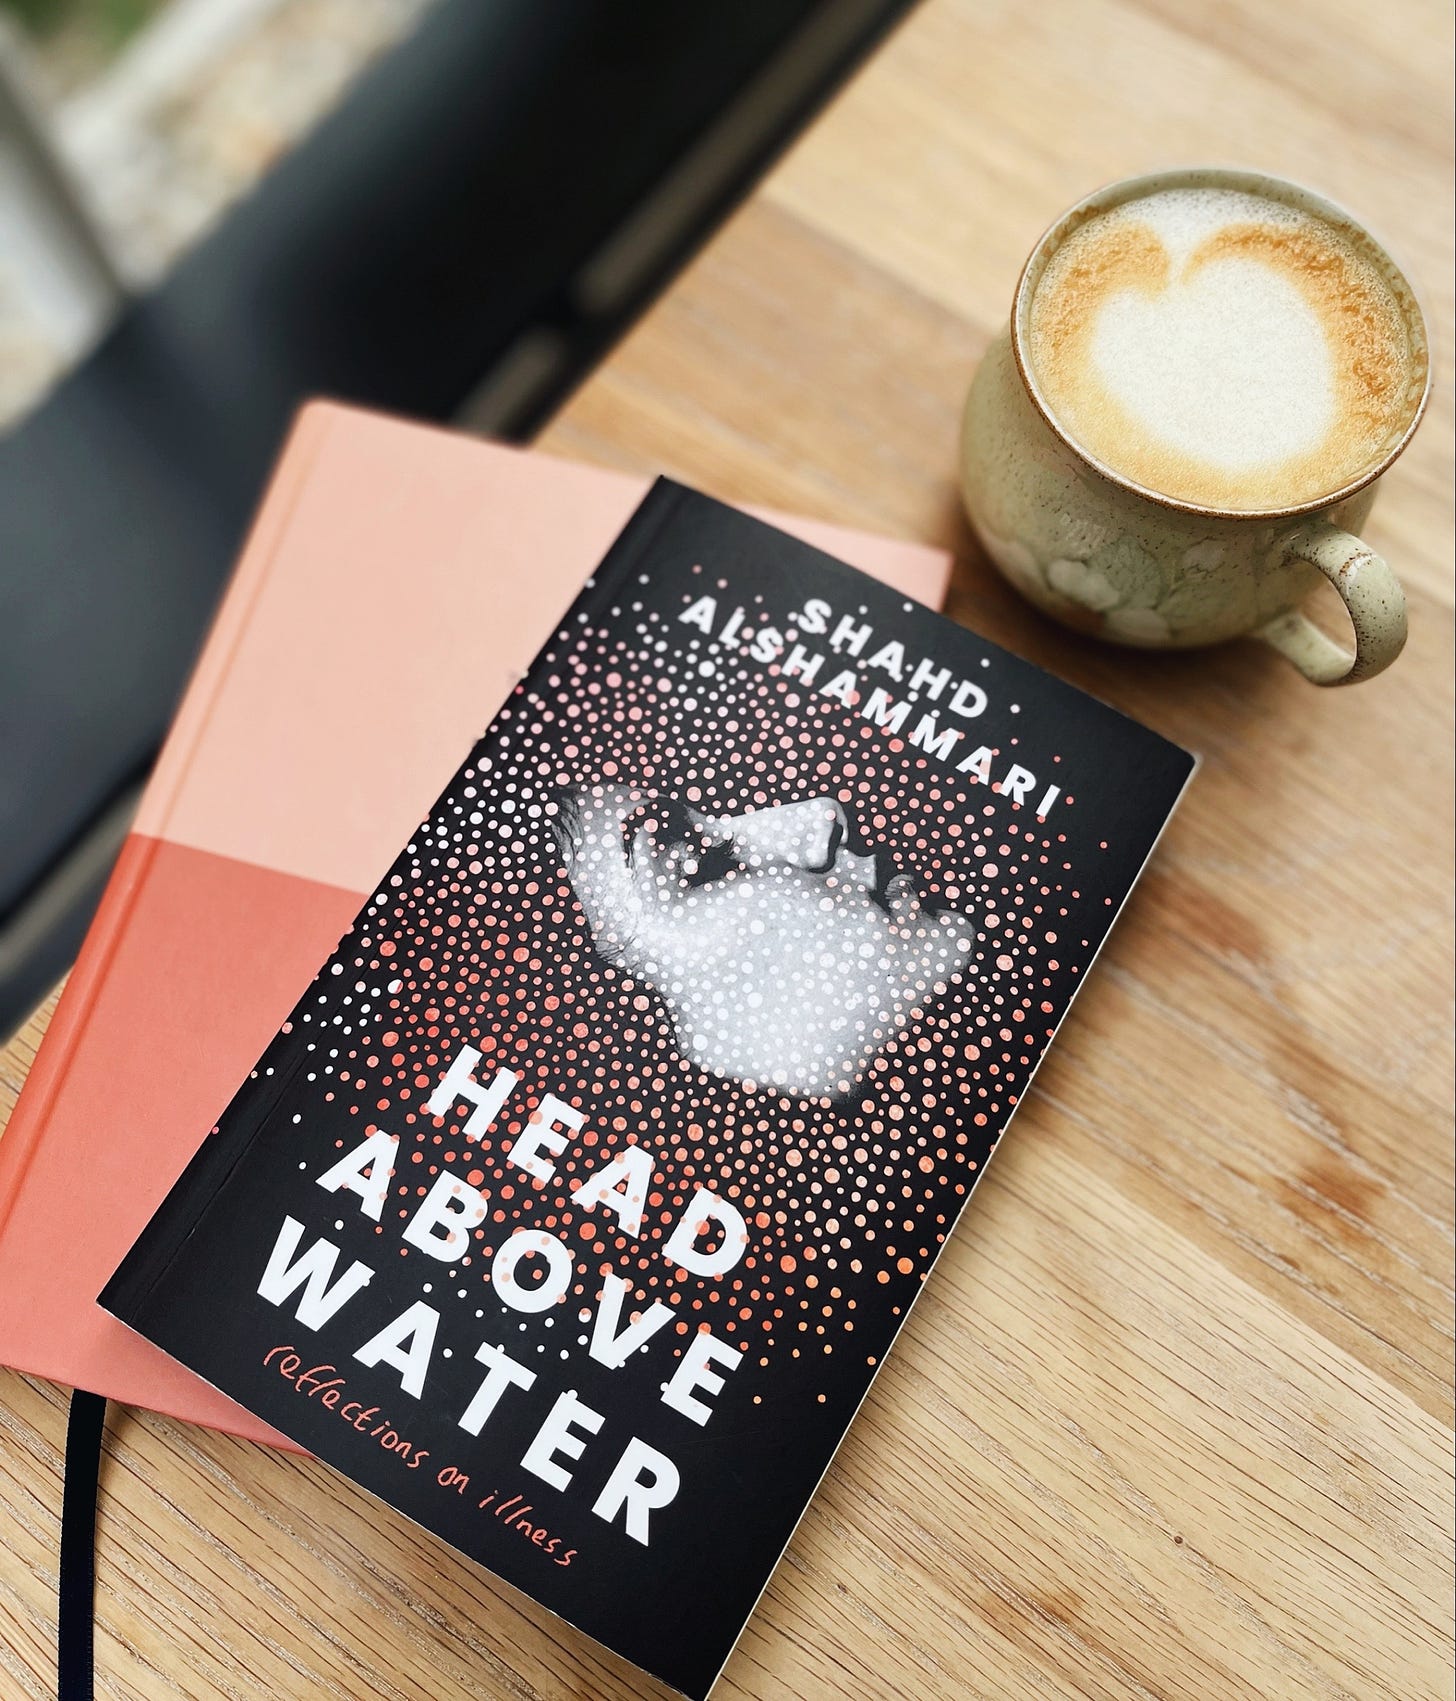 A copy of Head Above Water beside a cup of coffee